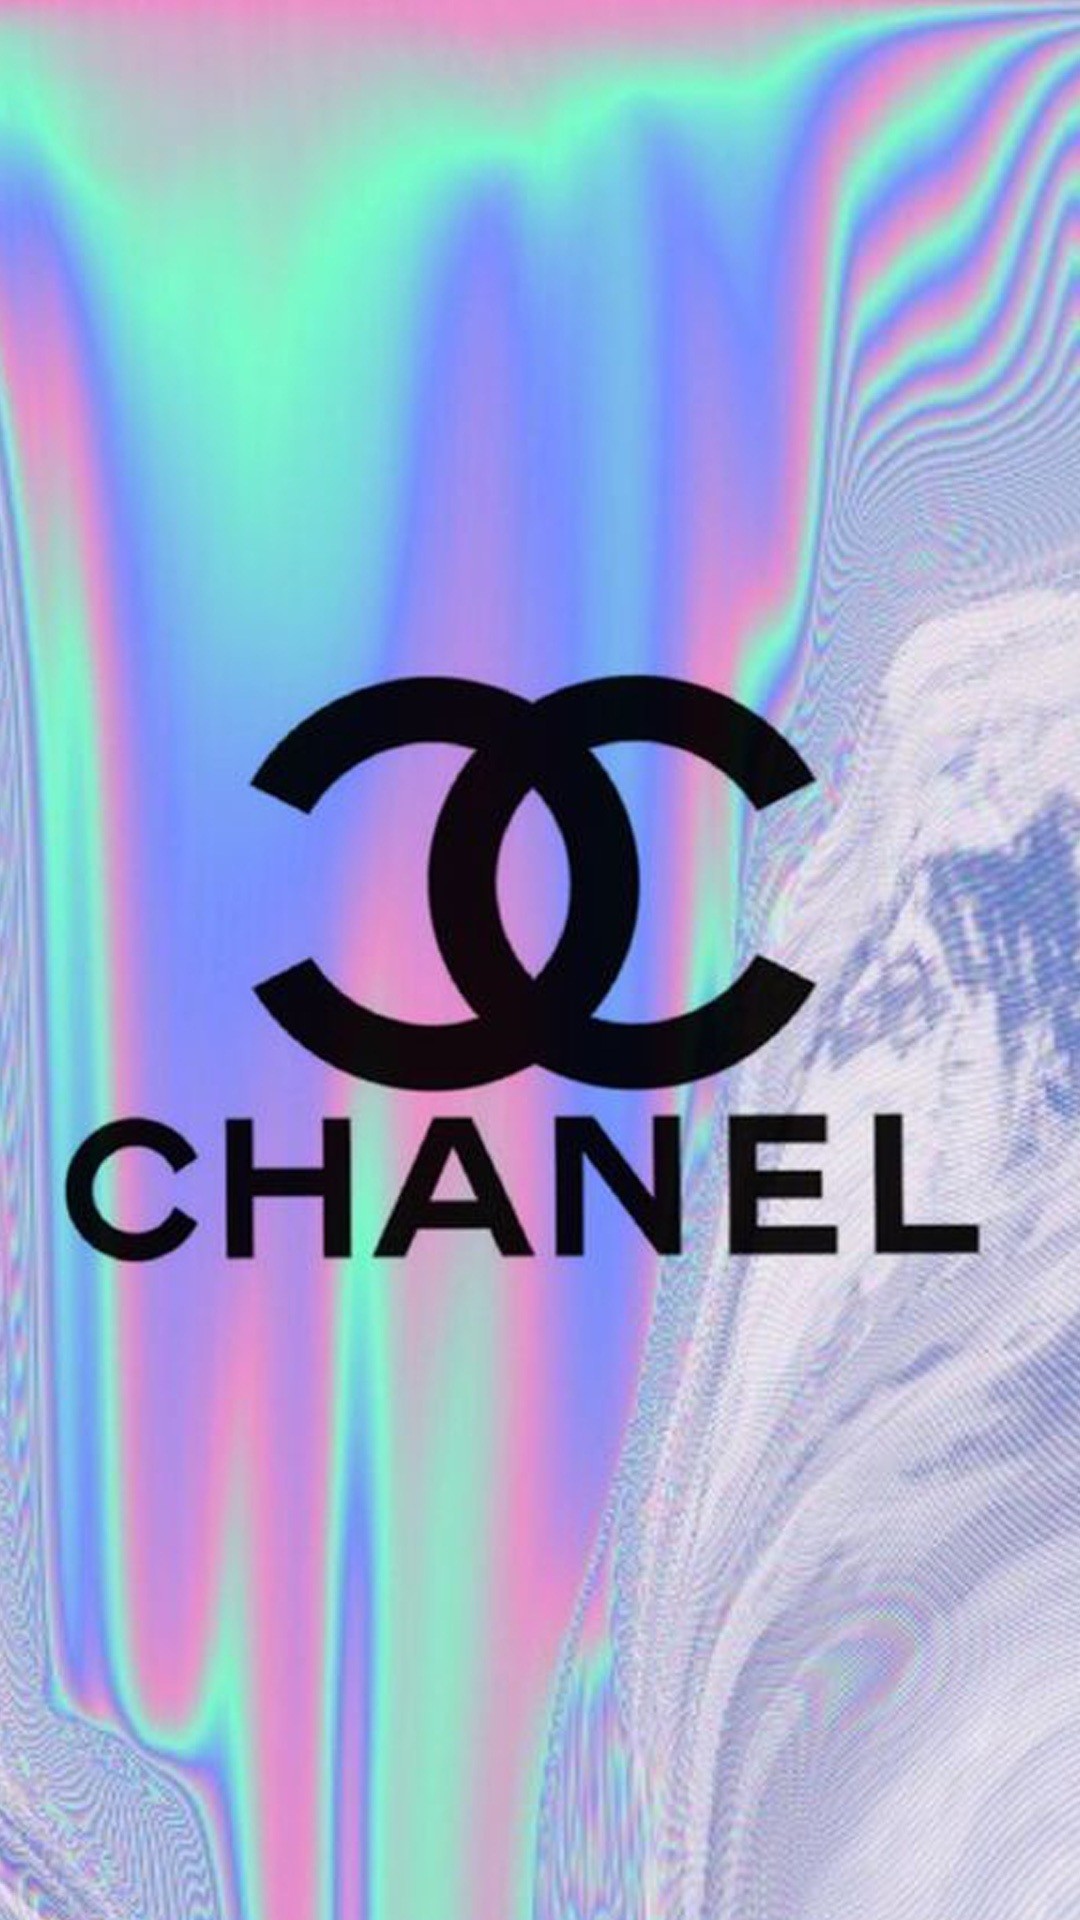 Girly Chanel Iphone Wallpaper Wallpapers For Iphone | Background Wallpapers